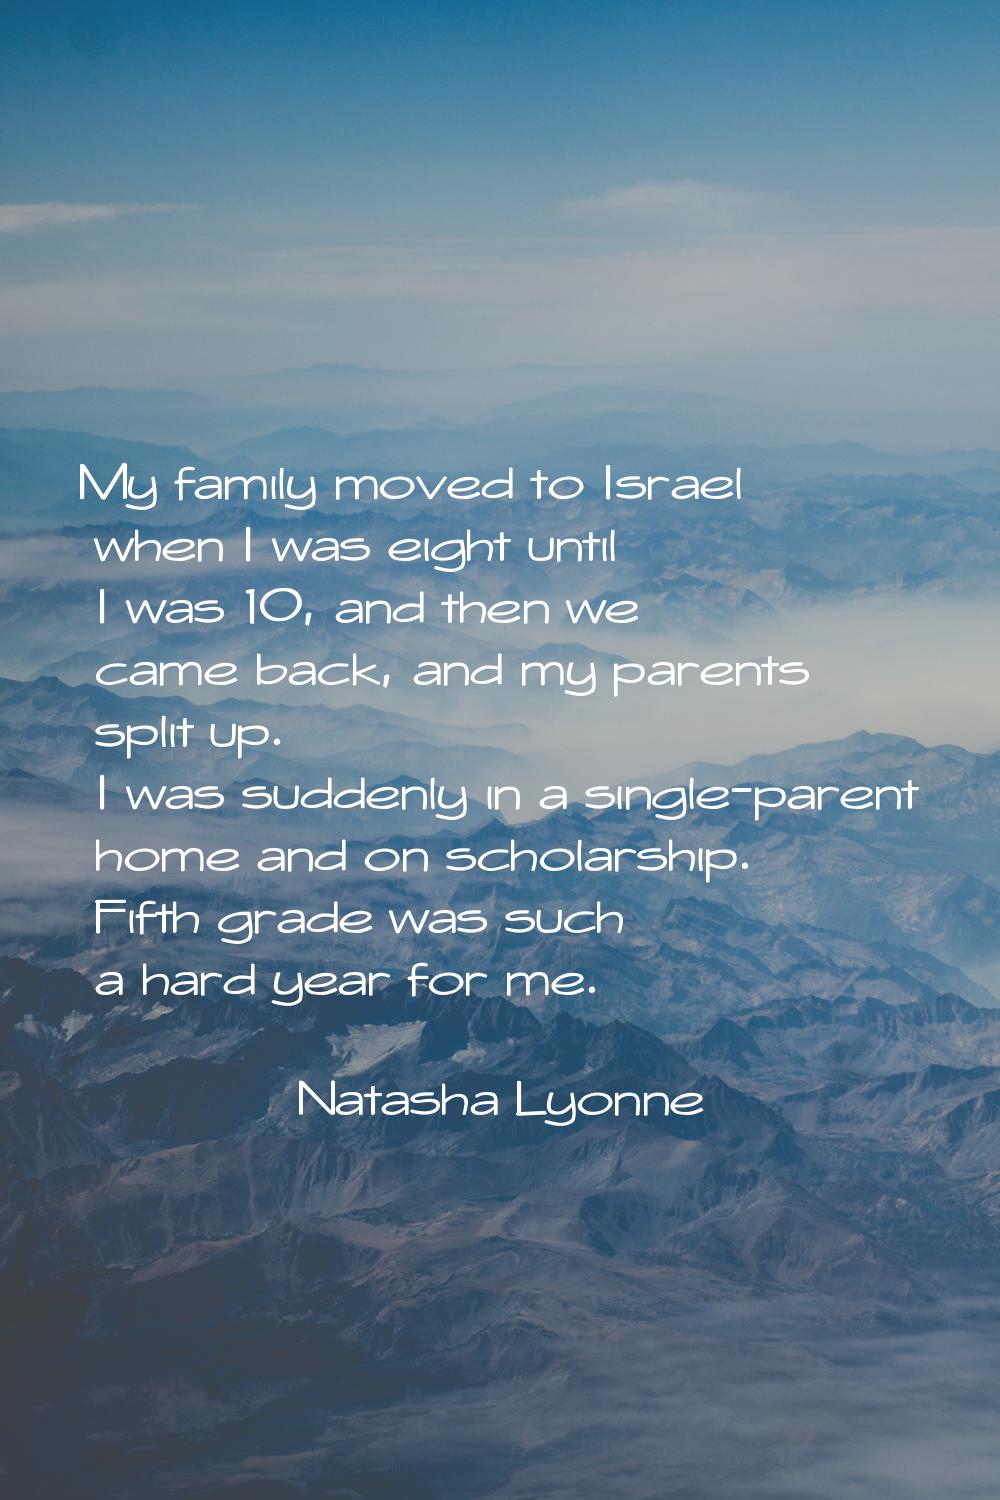 My family moved to Israel when I was eight until I was 10, and then we came back, and my parents sp